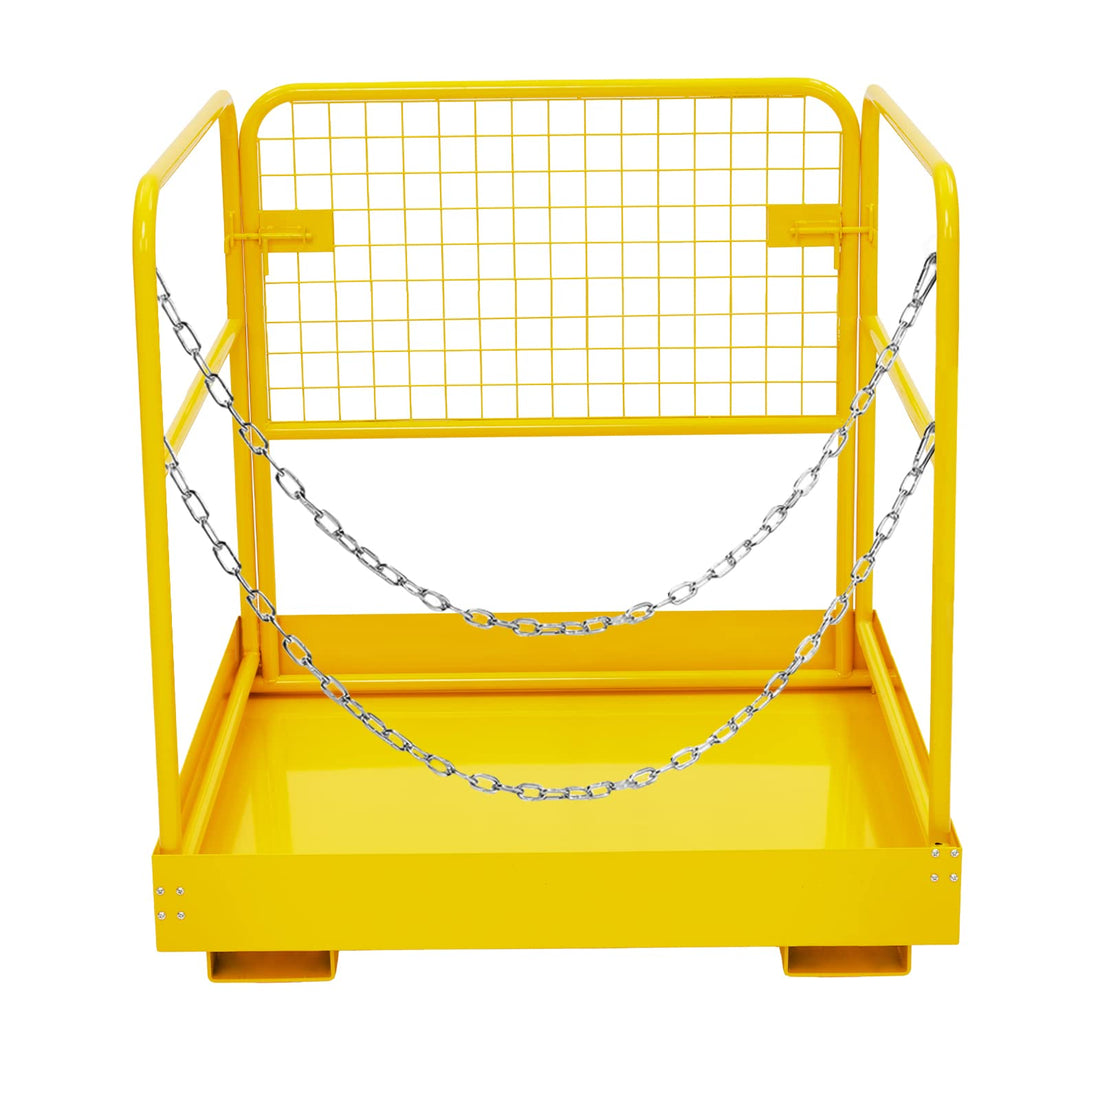 36x36" Safety Cage, 1200lbs Load, Foldable - Aerial Tasks - GARVEE